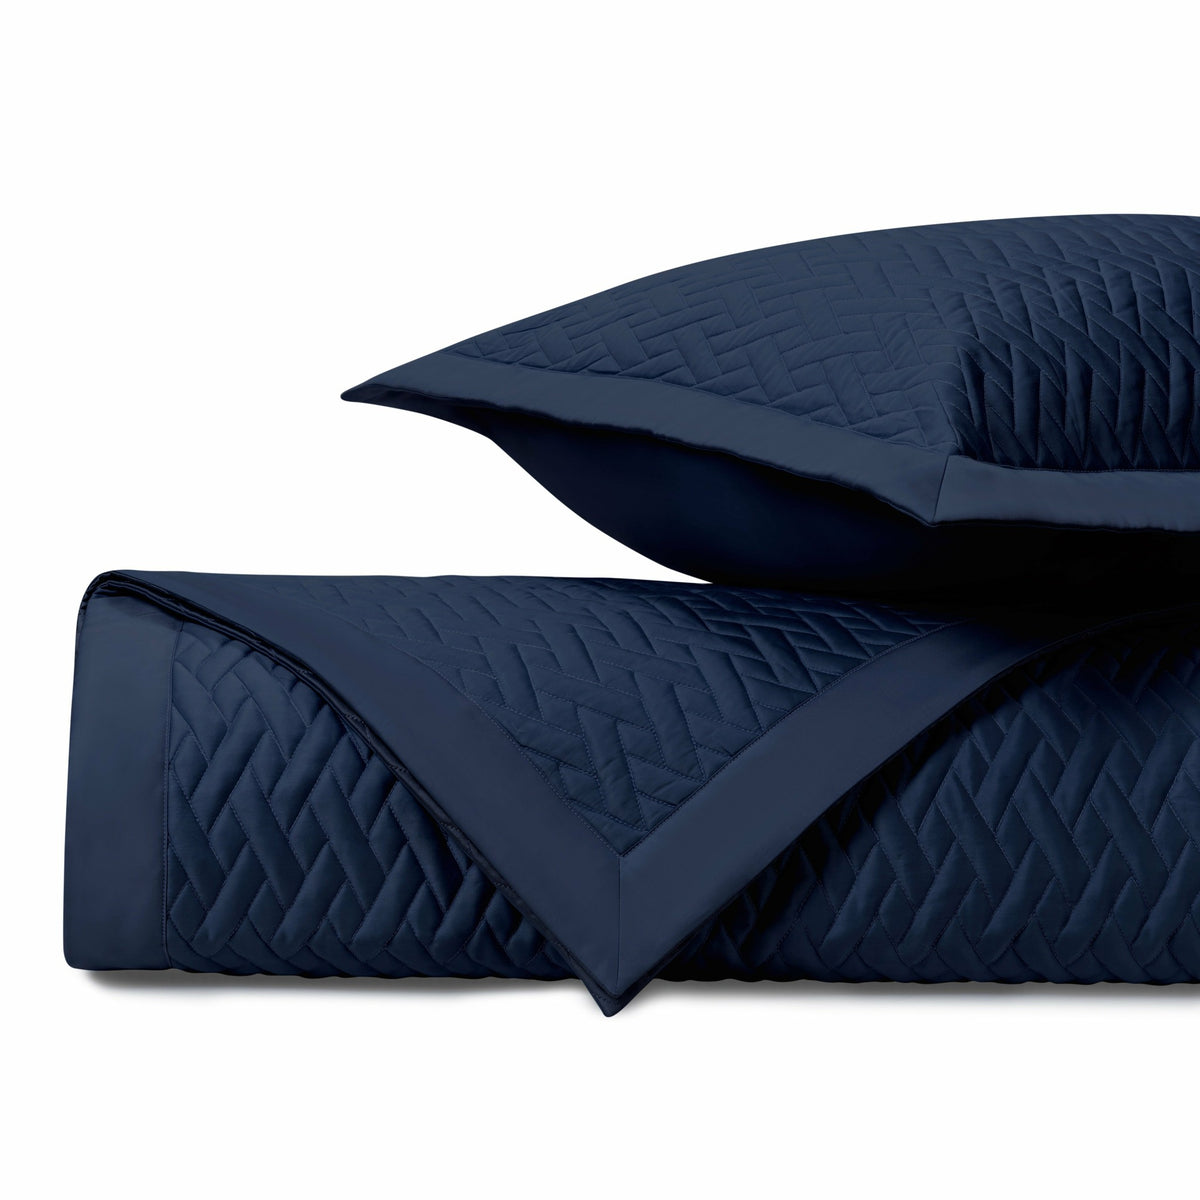 Home Treasures Viscaya Quilted Bedding Navy Blue Fine Linens